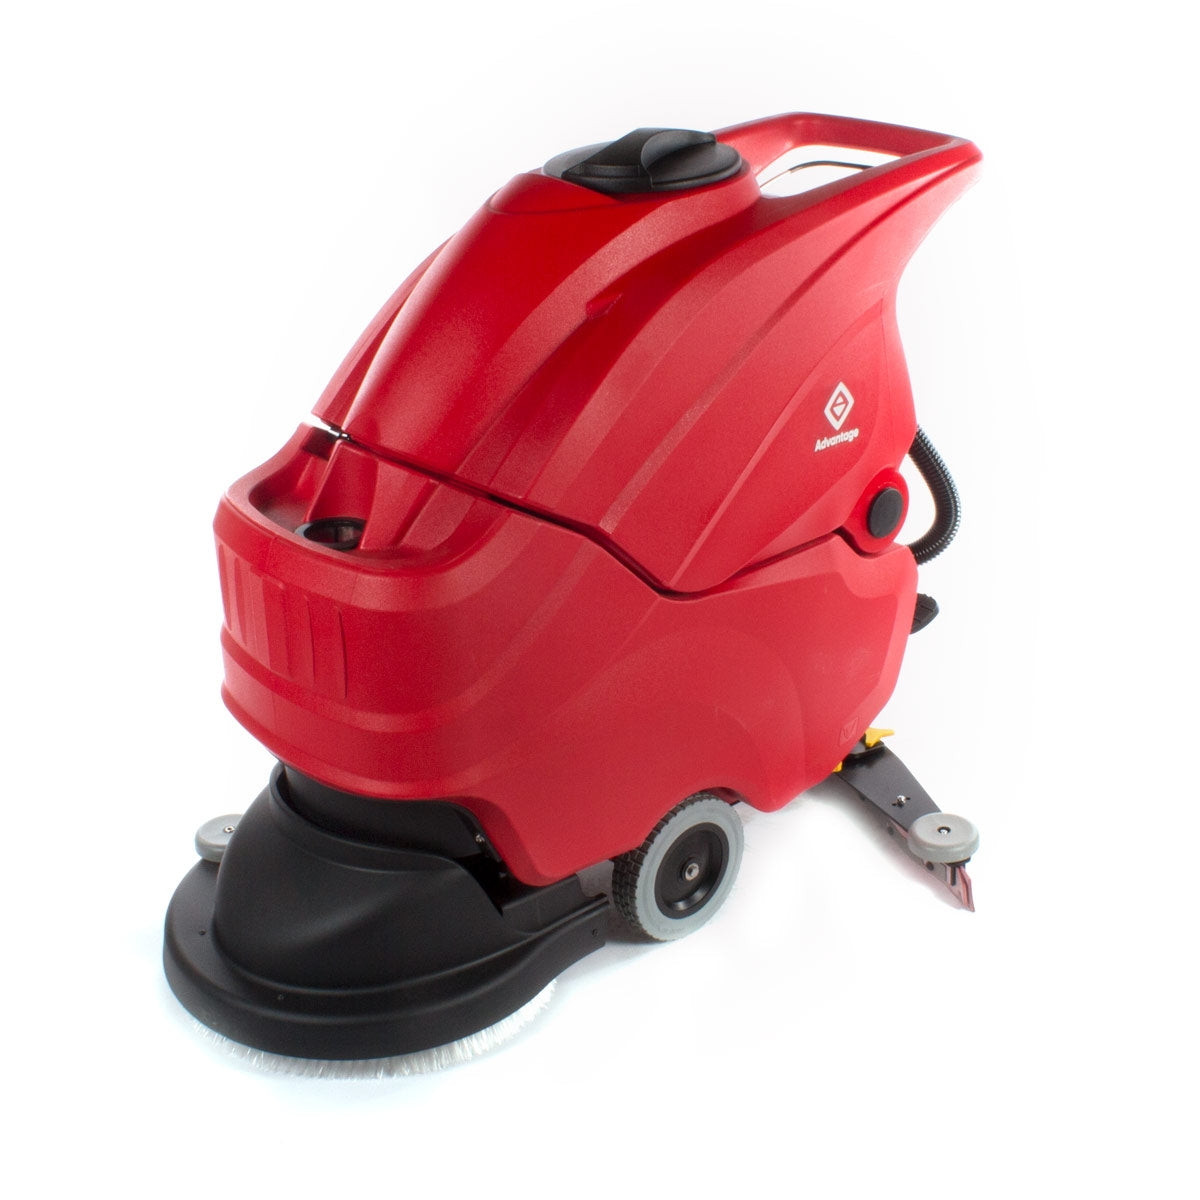 Wholesale Spin Scrubber for Scrubbing and Cleaning Any Surface 